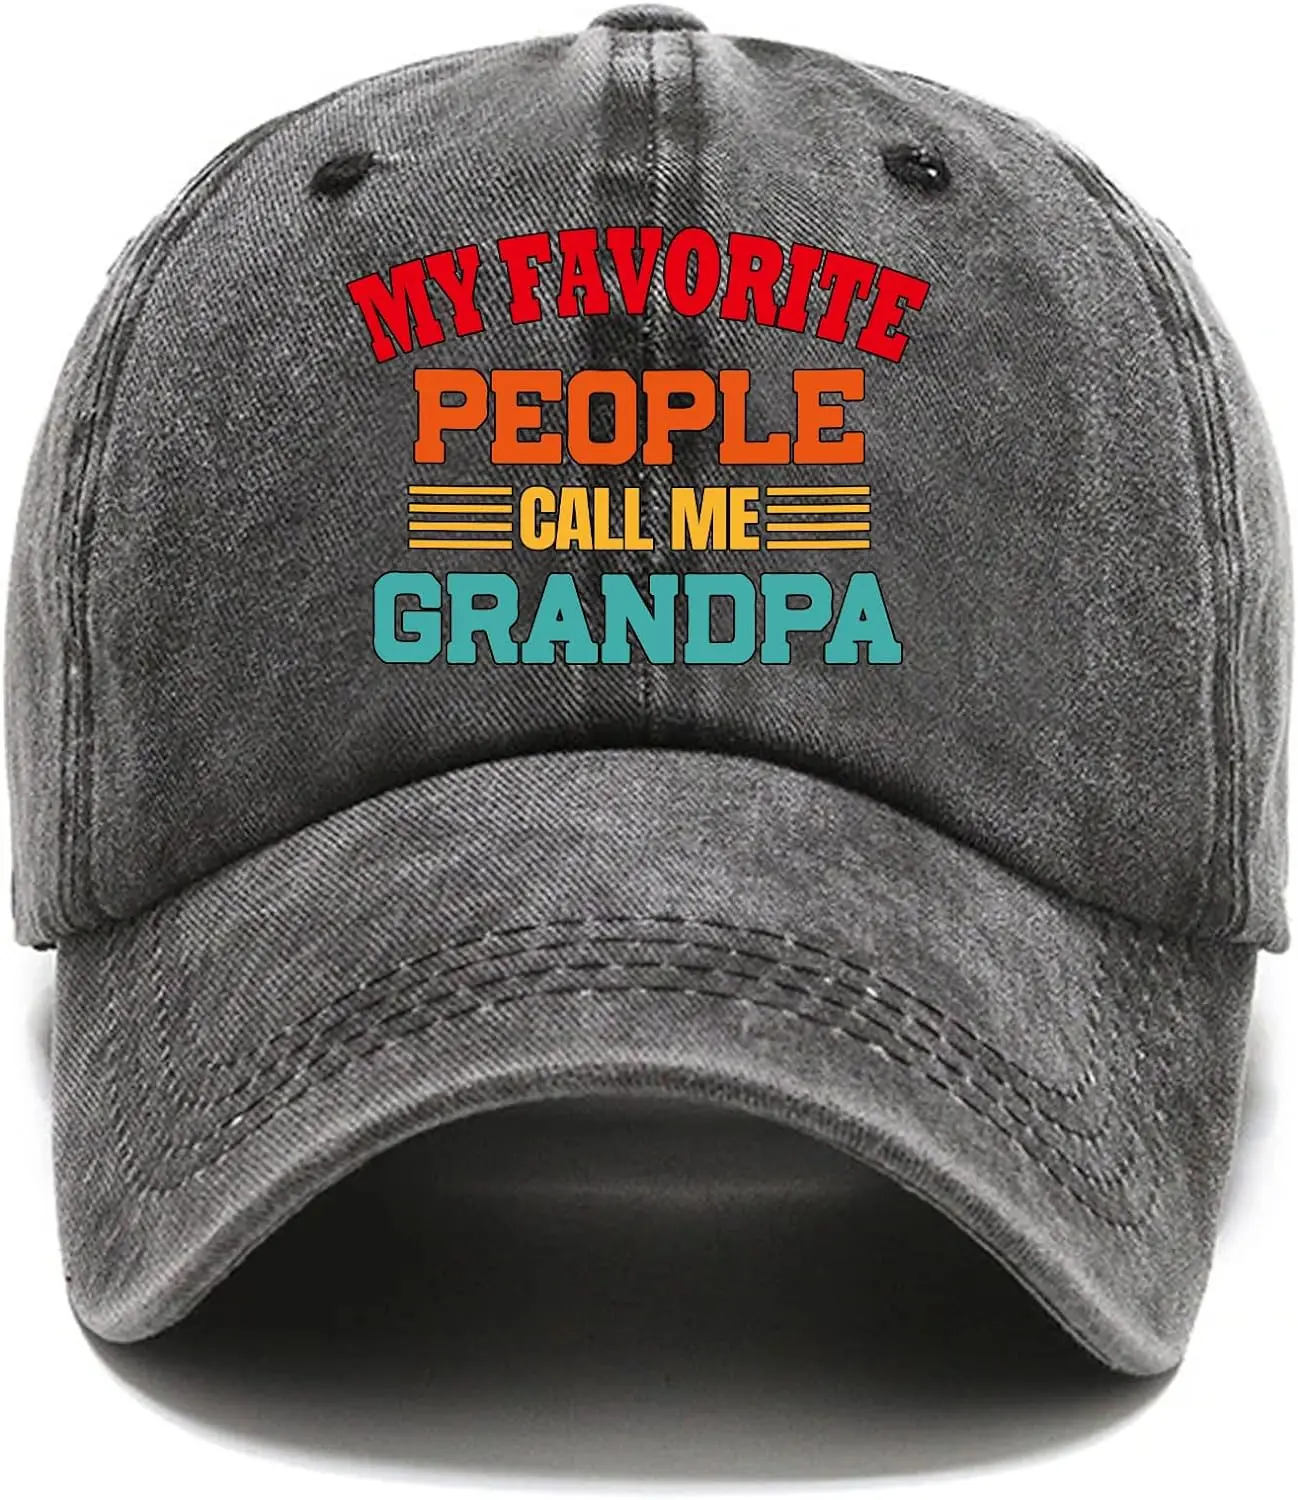 

My Favorite People Call Me Grandpa Fun Distressed Washed Baseball Cap, Vintage Adjustable Cotton Cap, Funny Retirement Gift